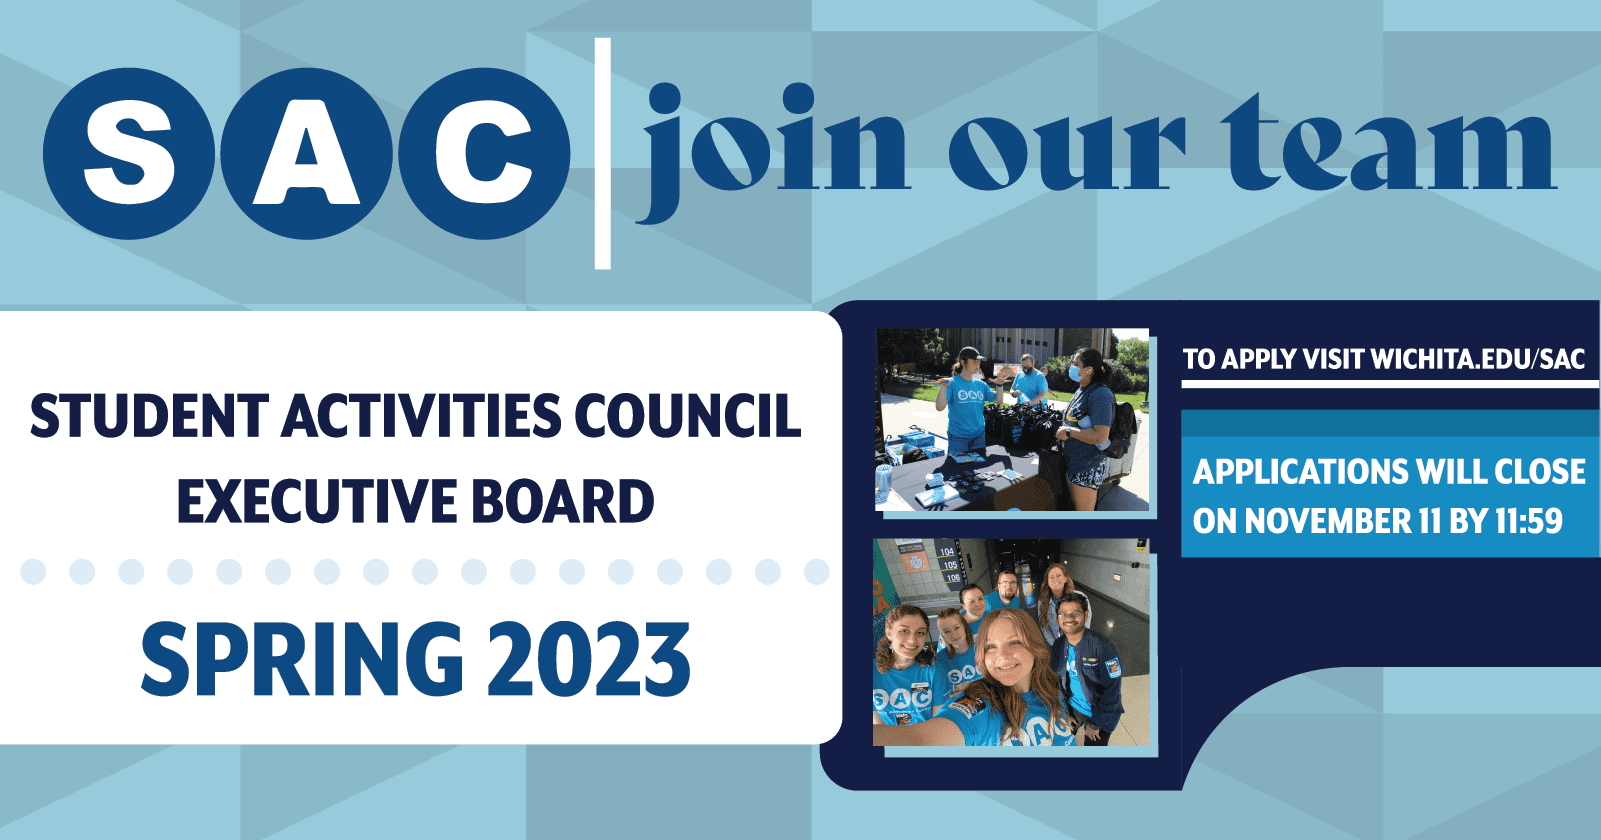 SAC join our team. Student Activities Council executive board spring twenty twenty three. to apply visit wichita dot edu forward slash s a c. application with close on november eleventh by eleven fifty nine p m